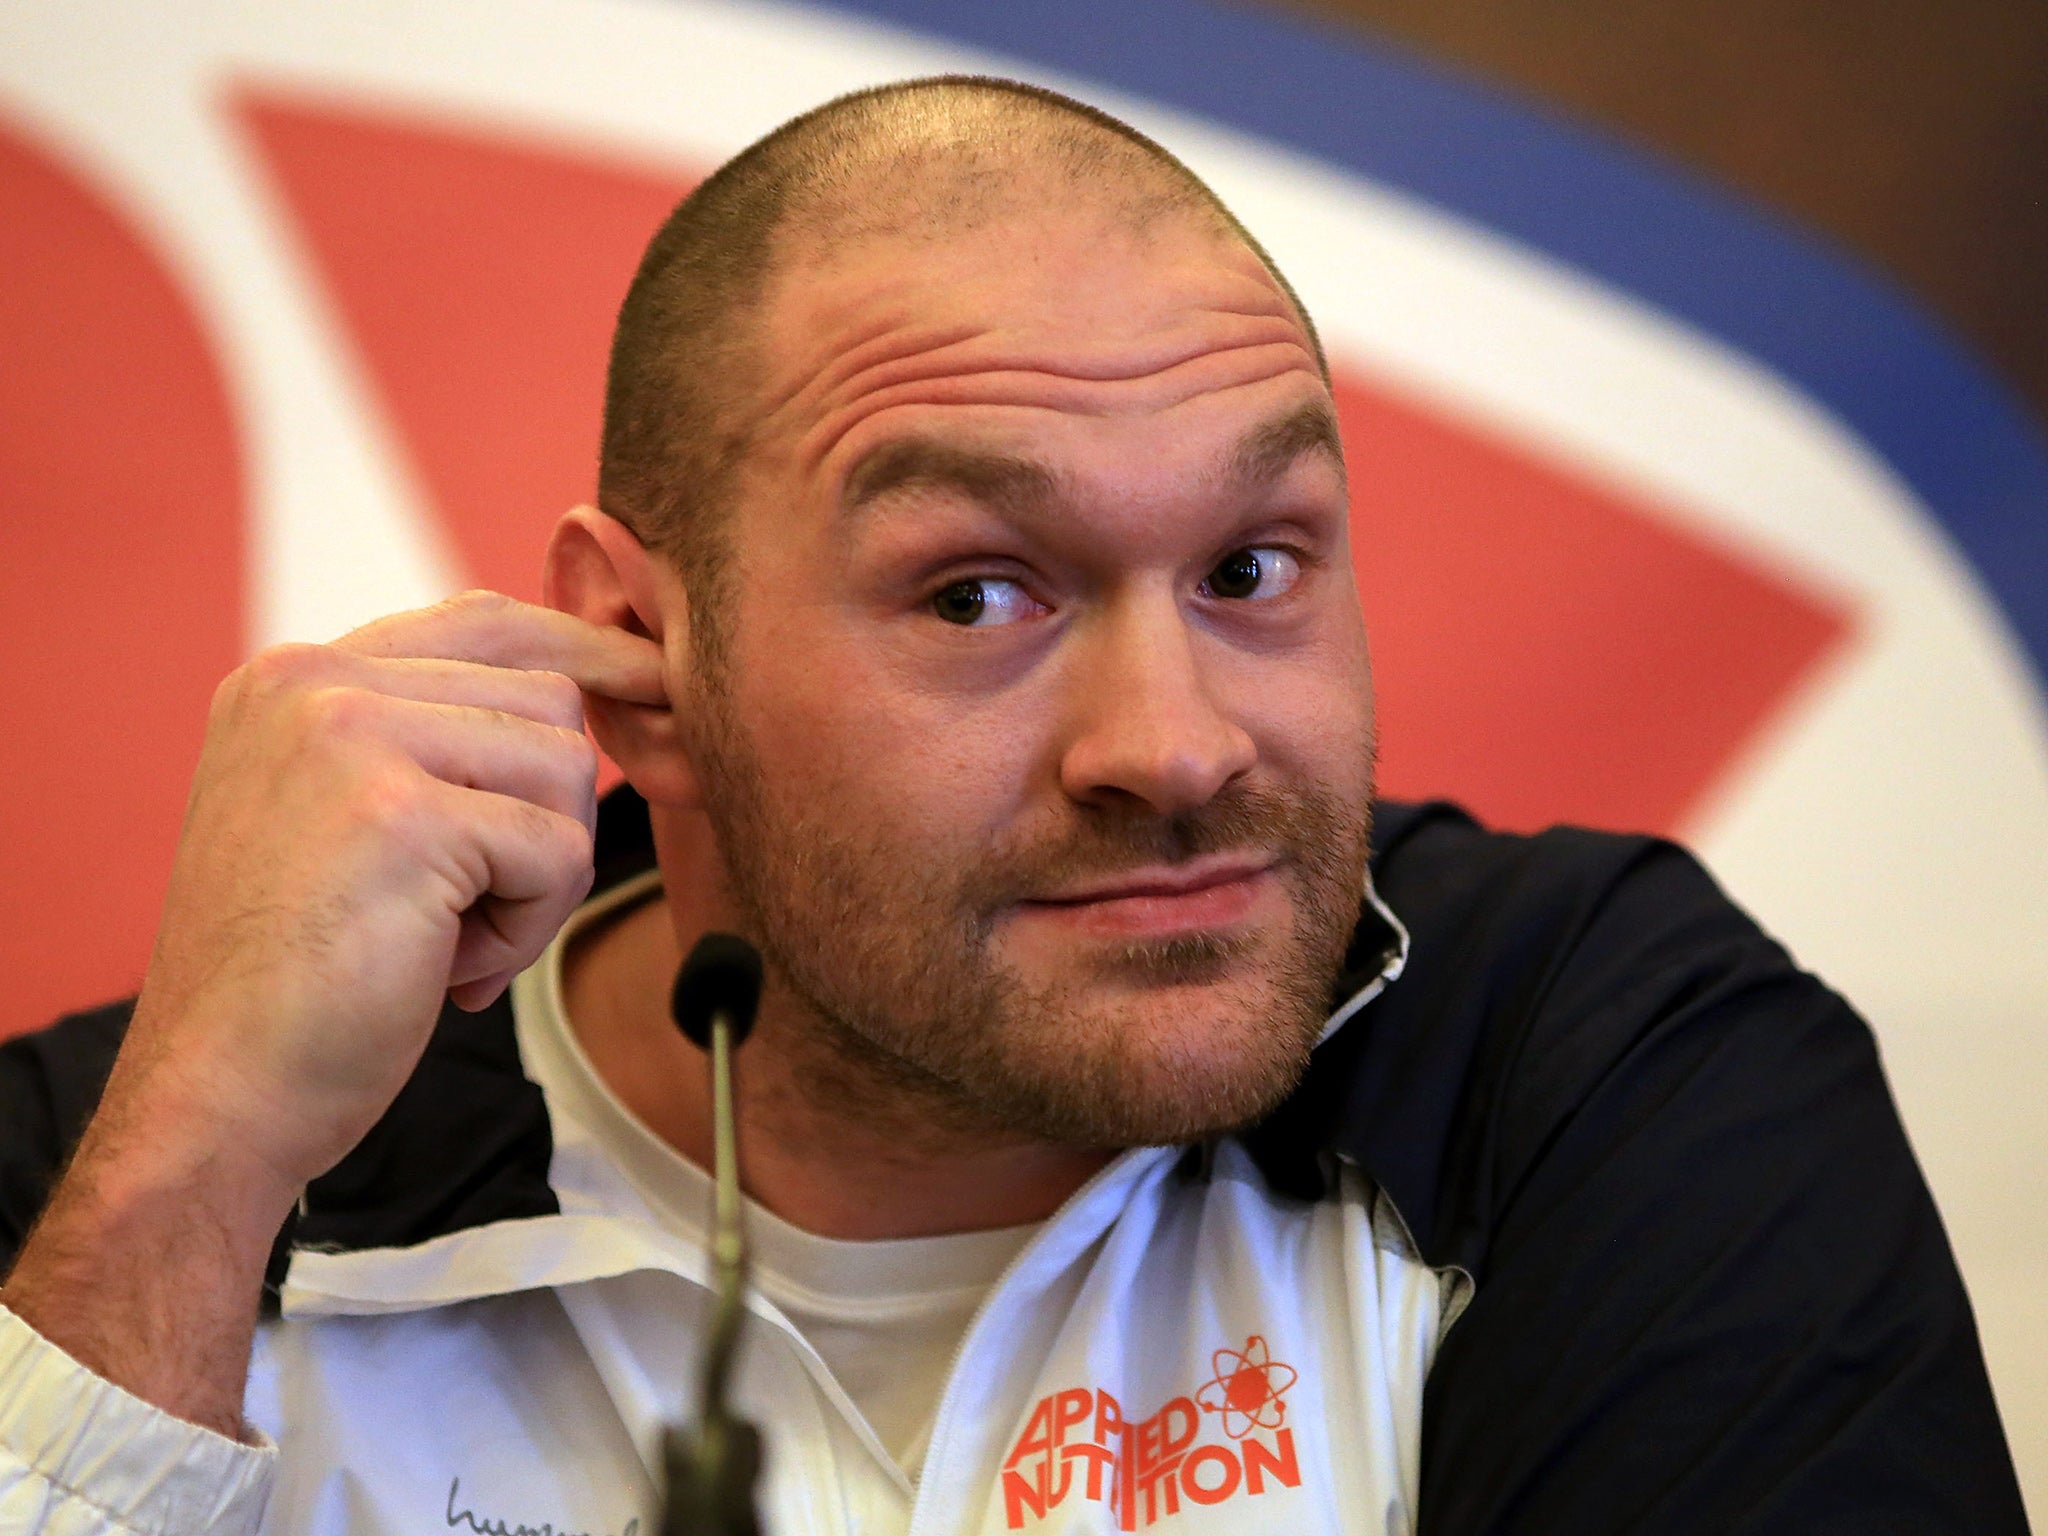 Fury will face Klitschko again in a rematch this July